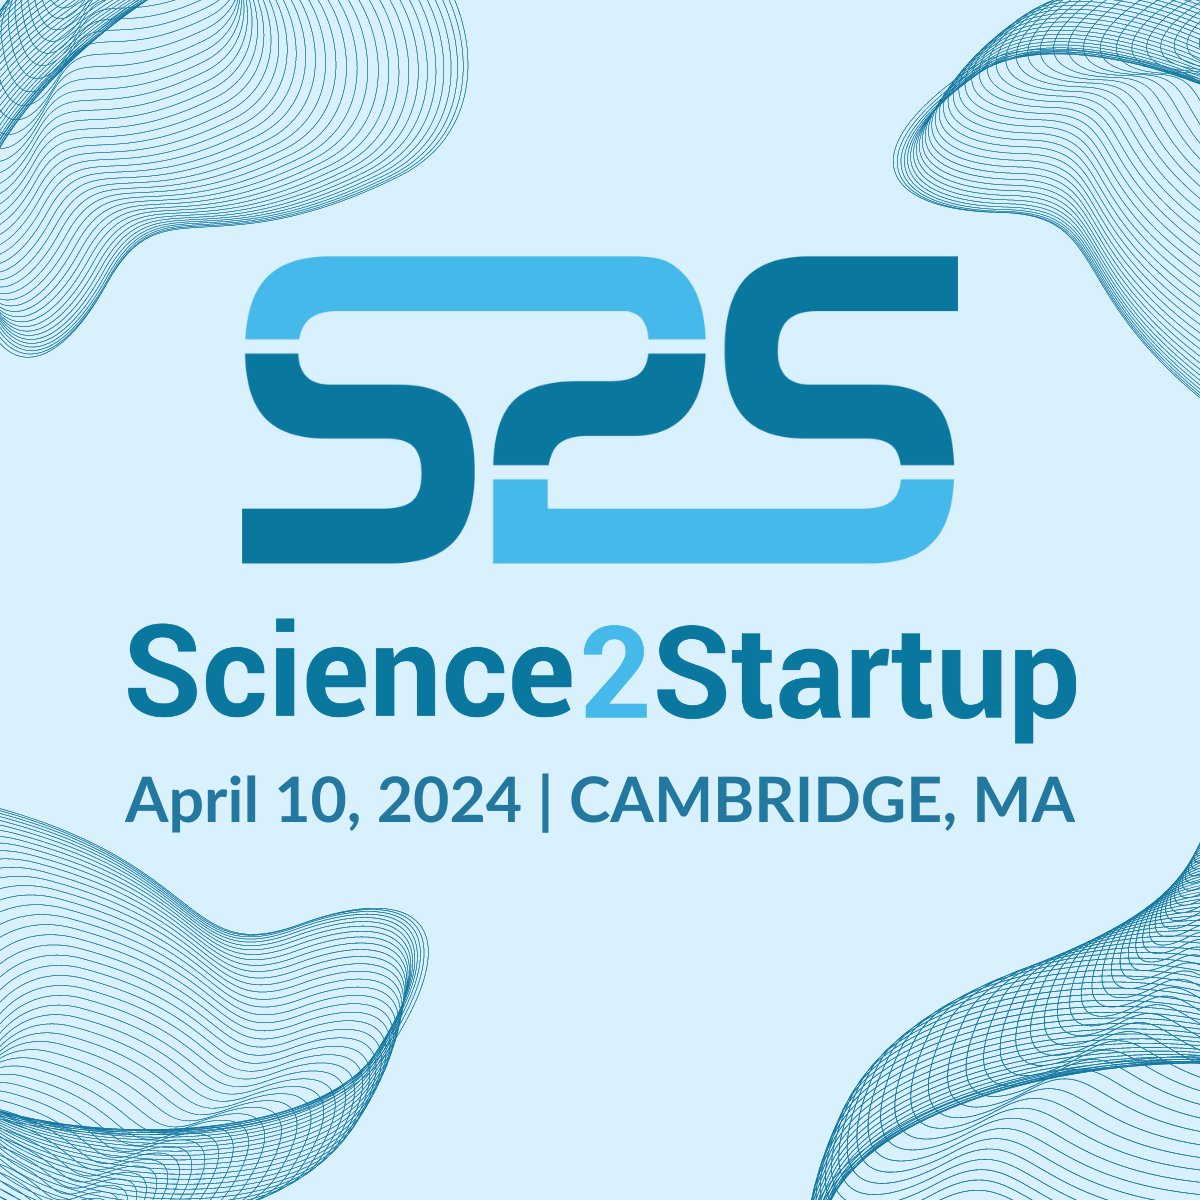 We’re excited to collaborate with our amazing partners to host this year’s #Science2Startup, a symposium where the top execs, VCs, and entrepreneurs will gather in Boston to bring #biotech startup ideas to life. Read the announcement: lnkd.in/eZxamvPr